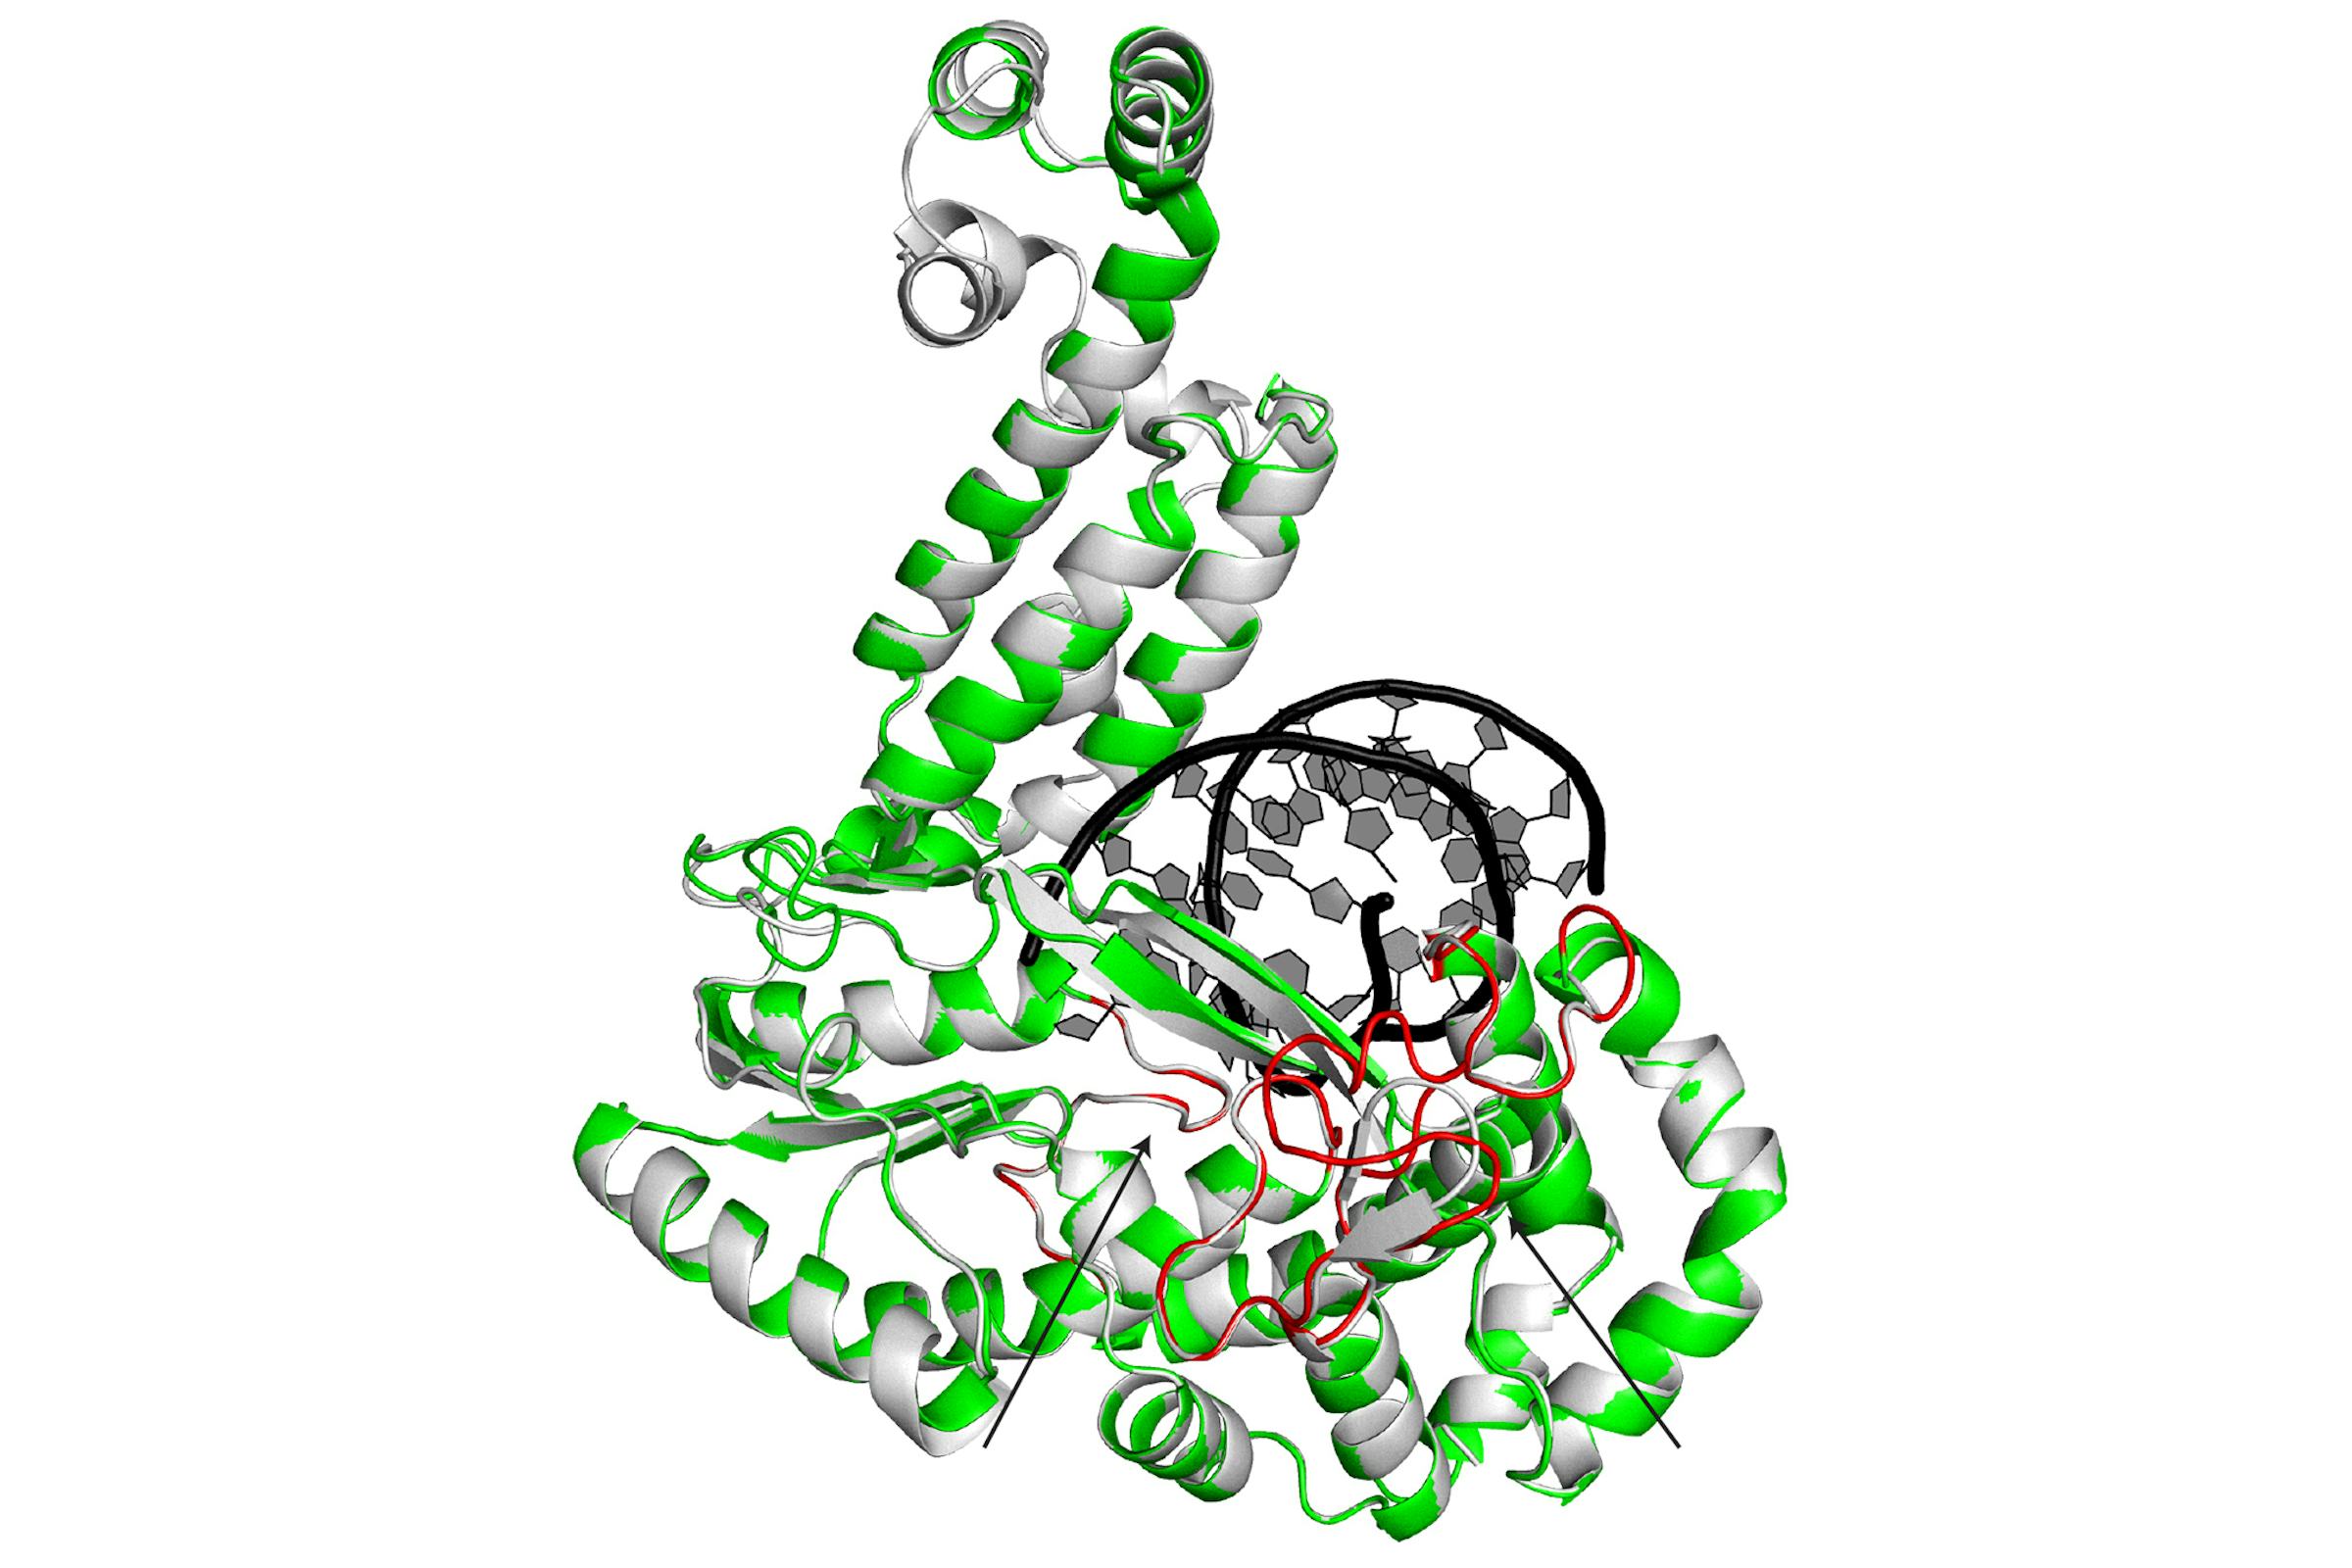 This image is a superposition of two enzymes: G2L4 and GsI-IIC RT.